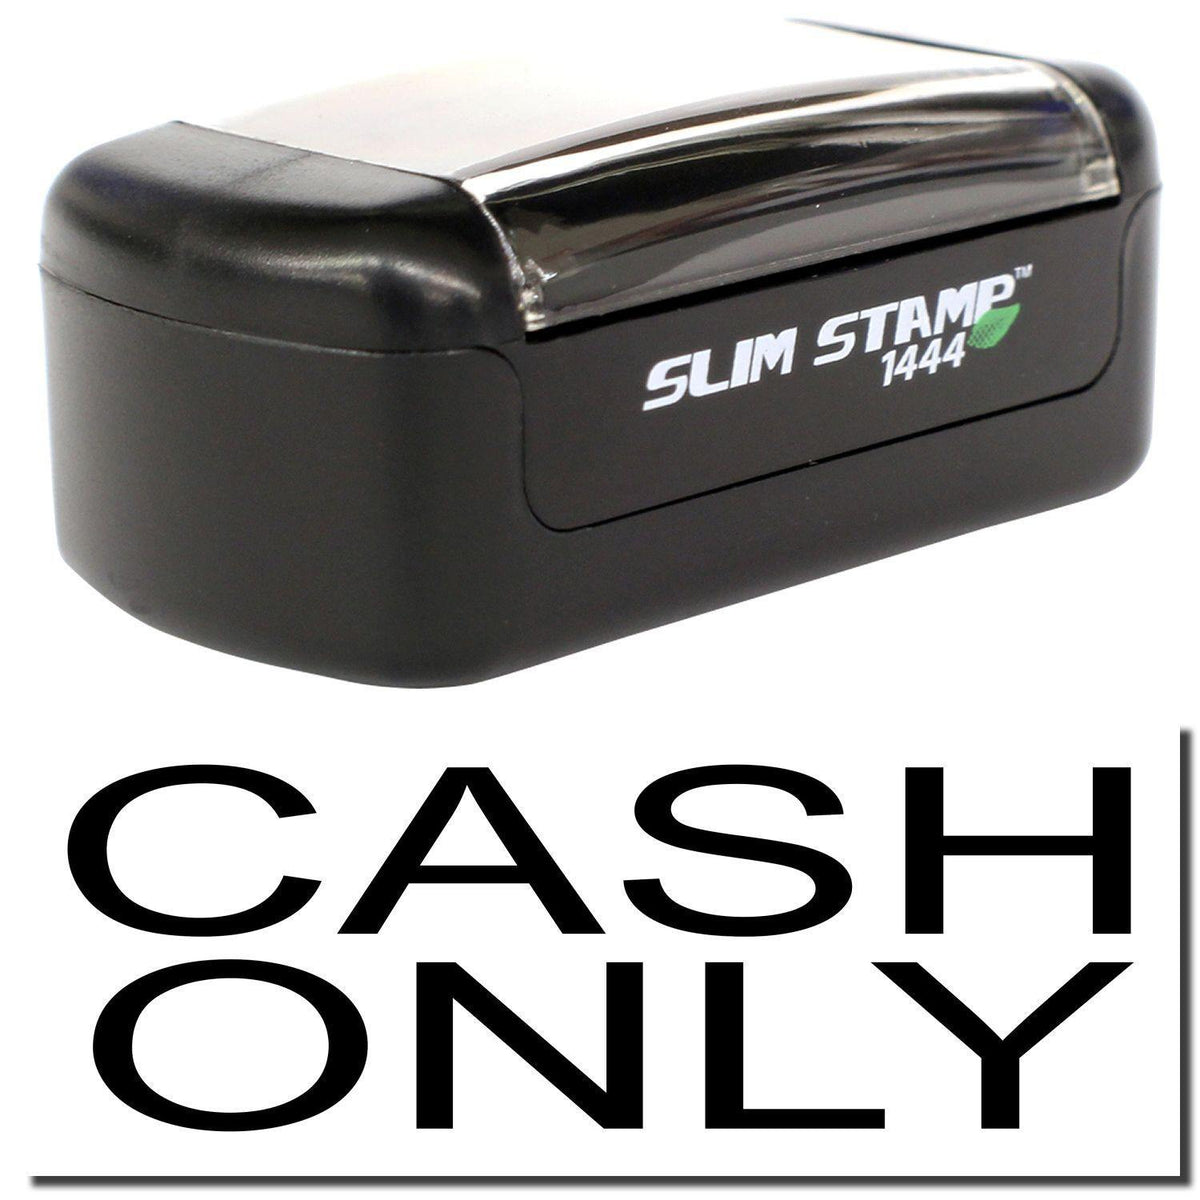 A stock office pre-inked stamp with a stamped image showing how the text &quot;CASH ONLY&quot; is displayed after stamping.